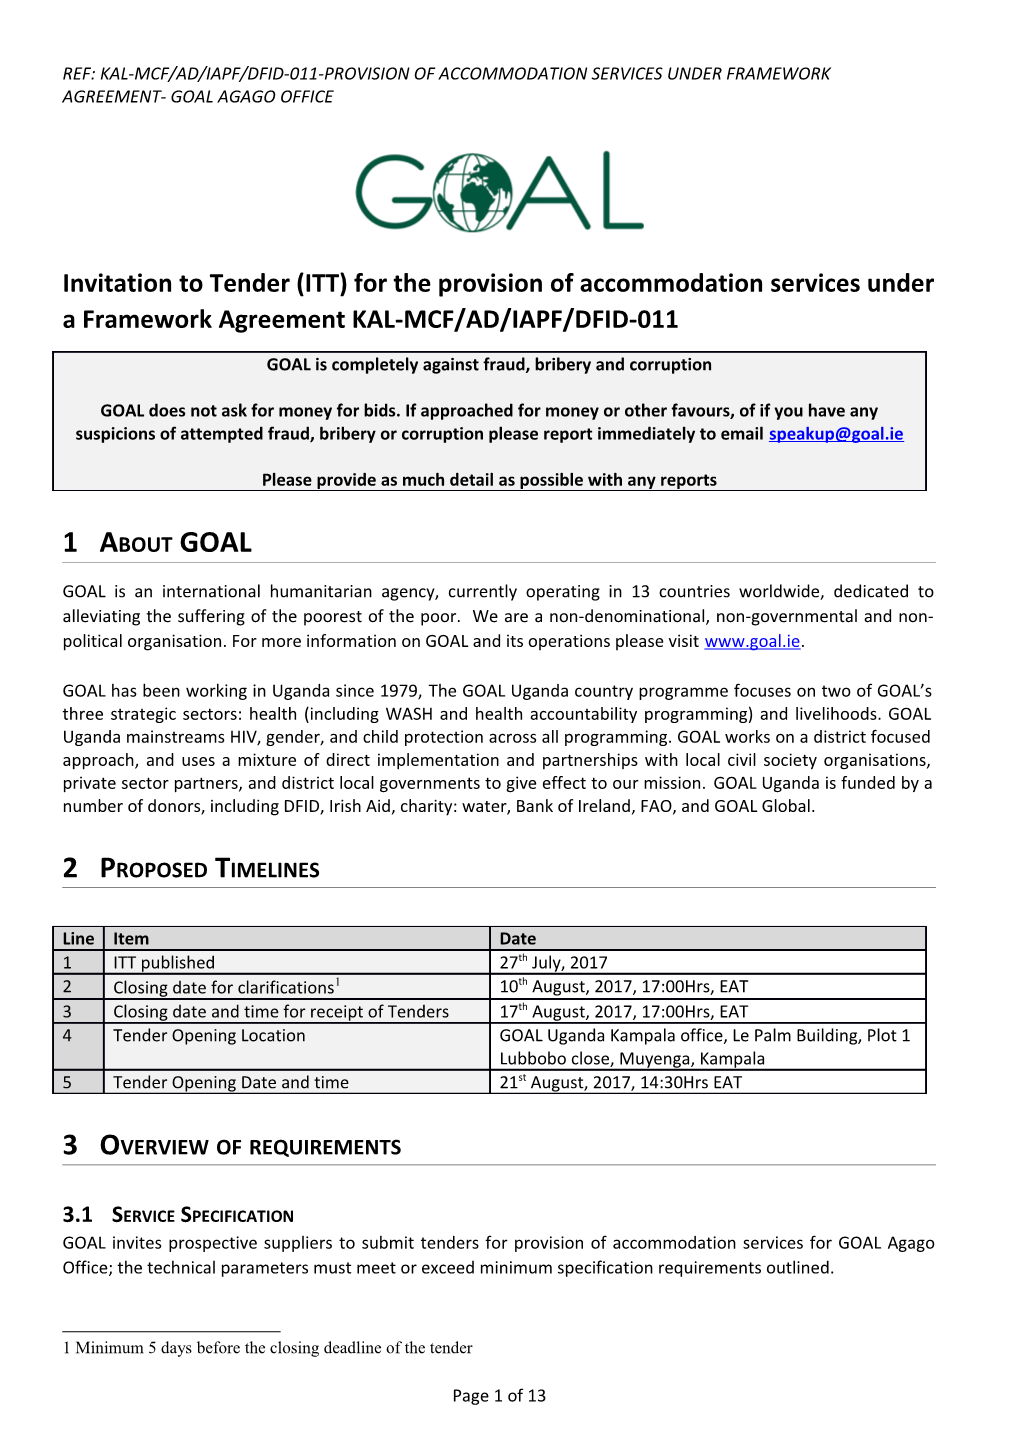 Invitation to Tender (ITT) for the Provision of Accommodation Services Under a Framework